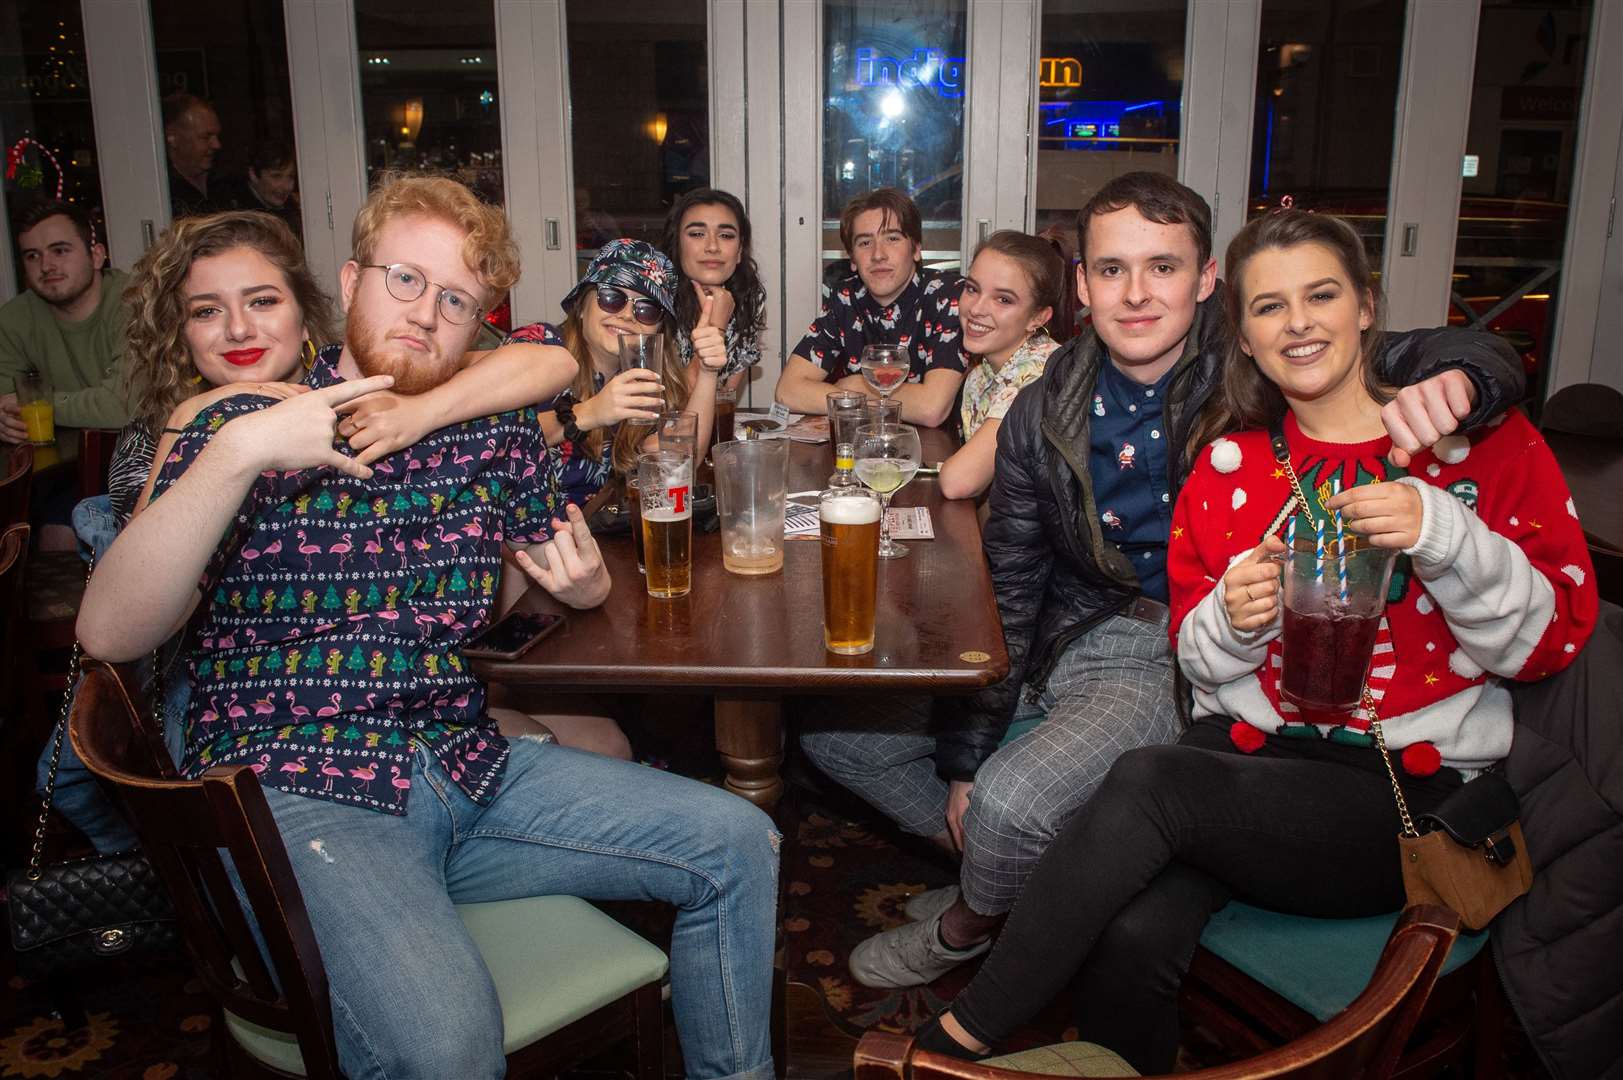 Xmas night out for this group of Friends. Picture: Callum Mackay. Image No. 042547.